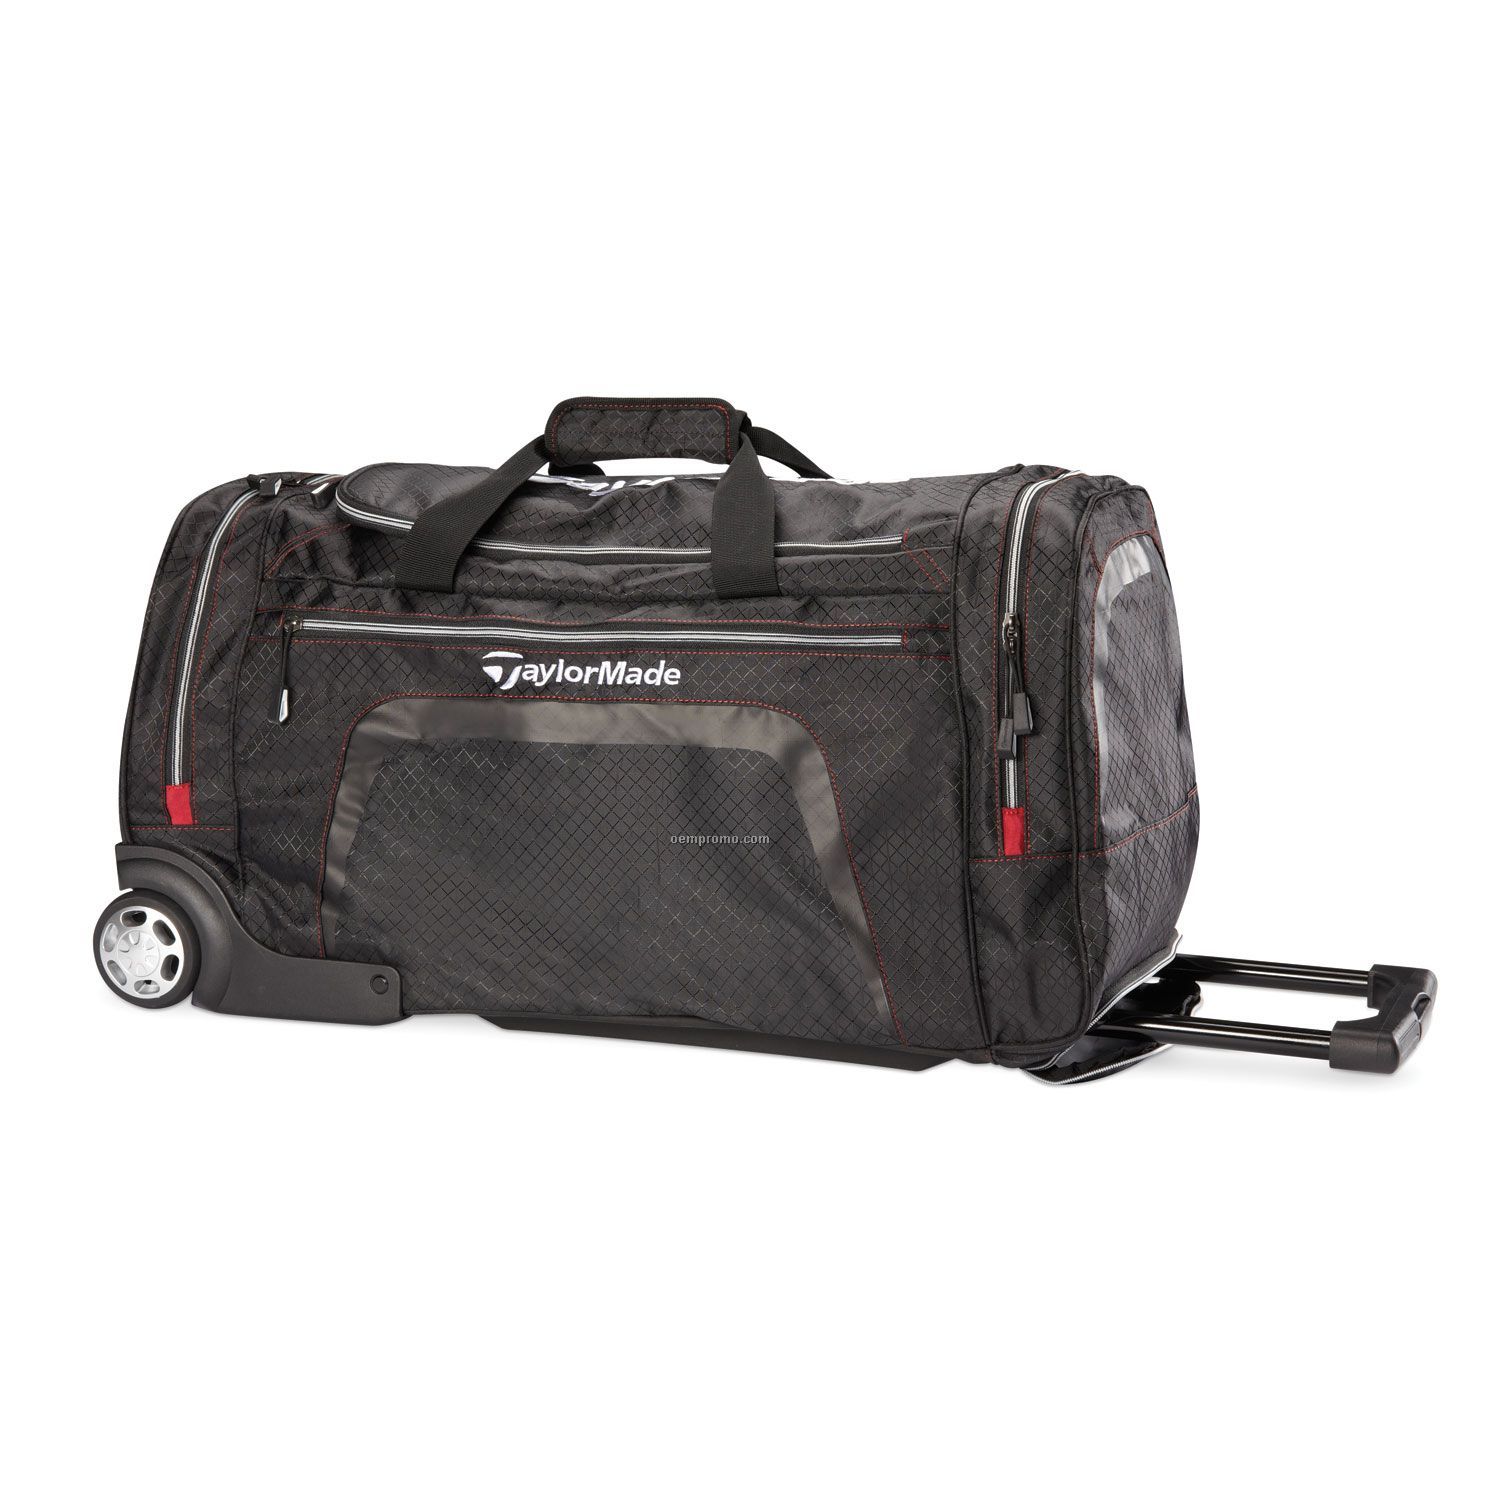 Taylormade Performance 26" Rolling Duffle Bag (2011) - Embroidered